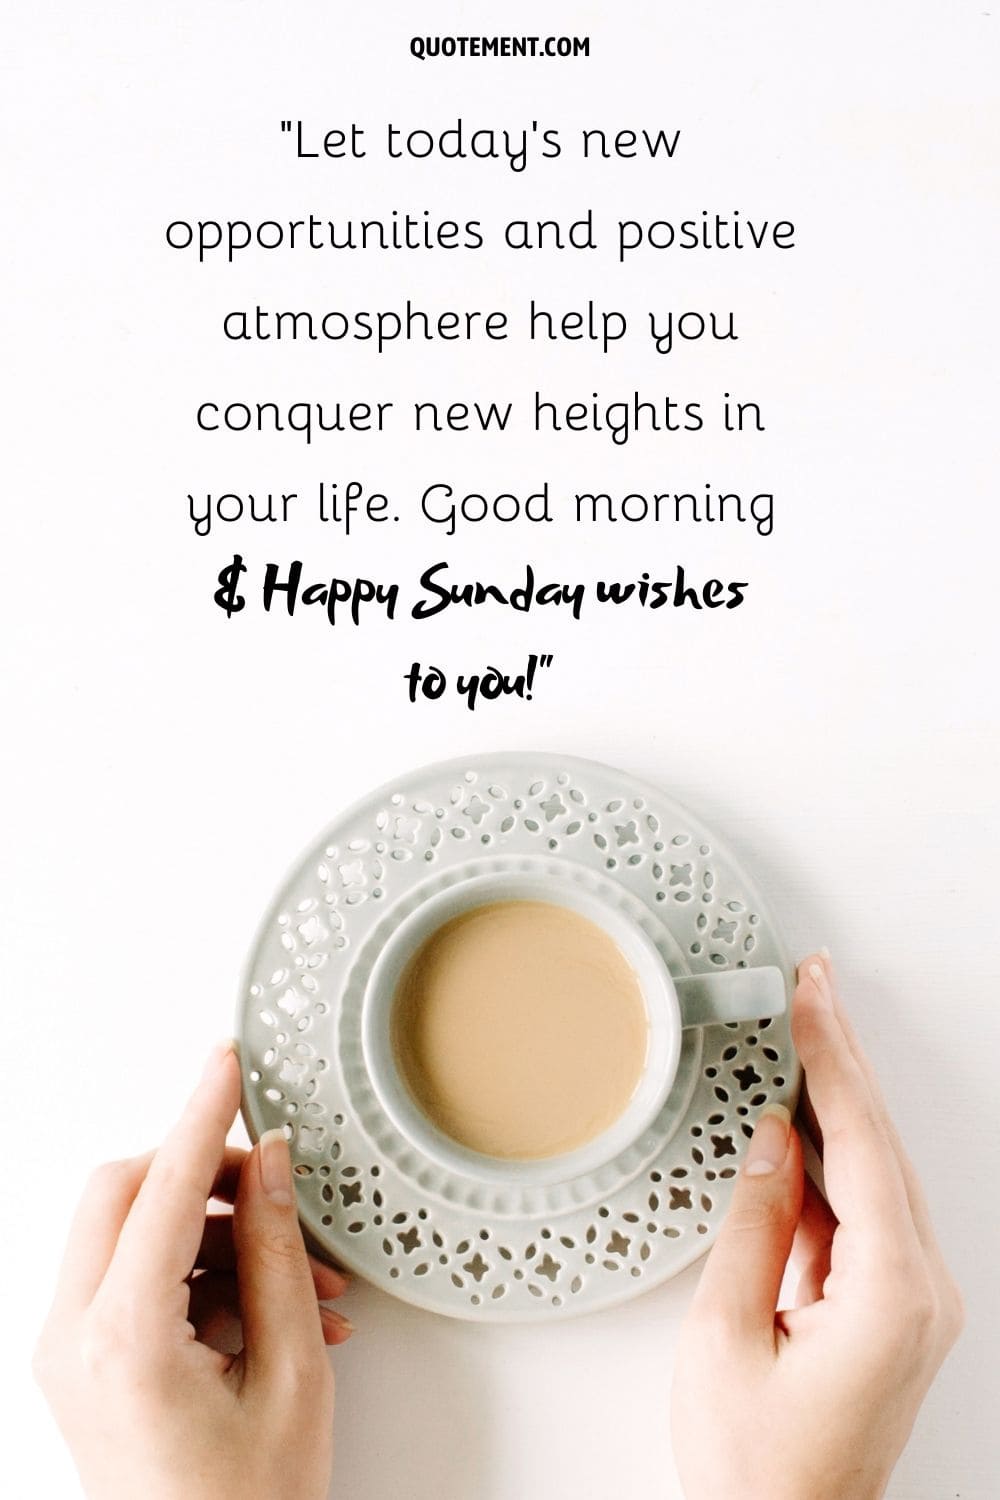 holding a white mug with coffee representing happy blessed sunday image